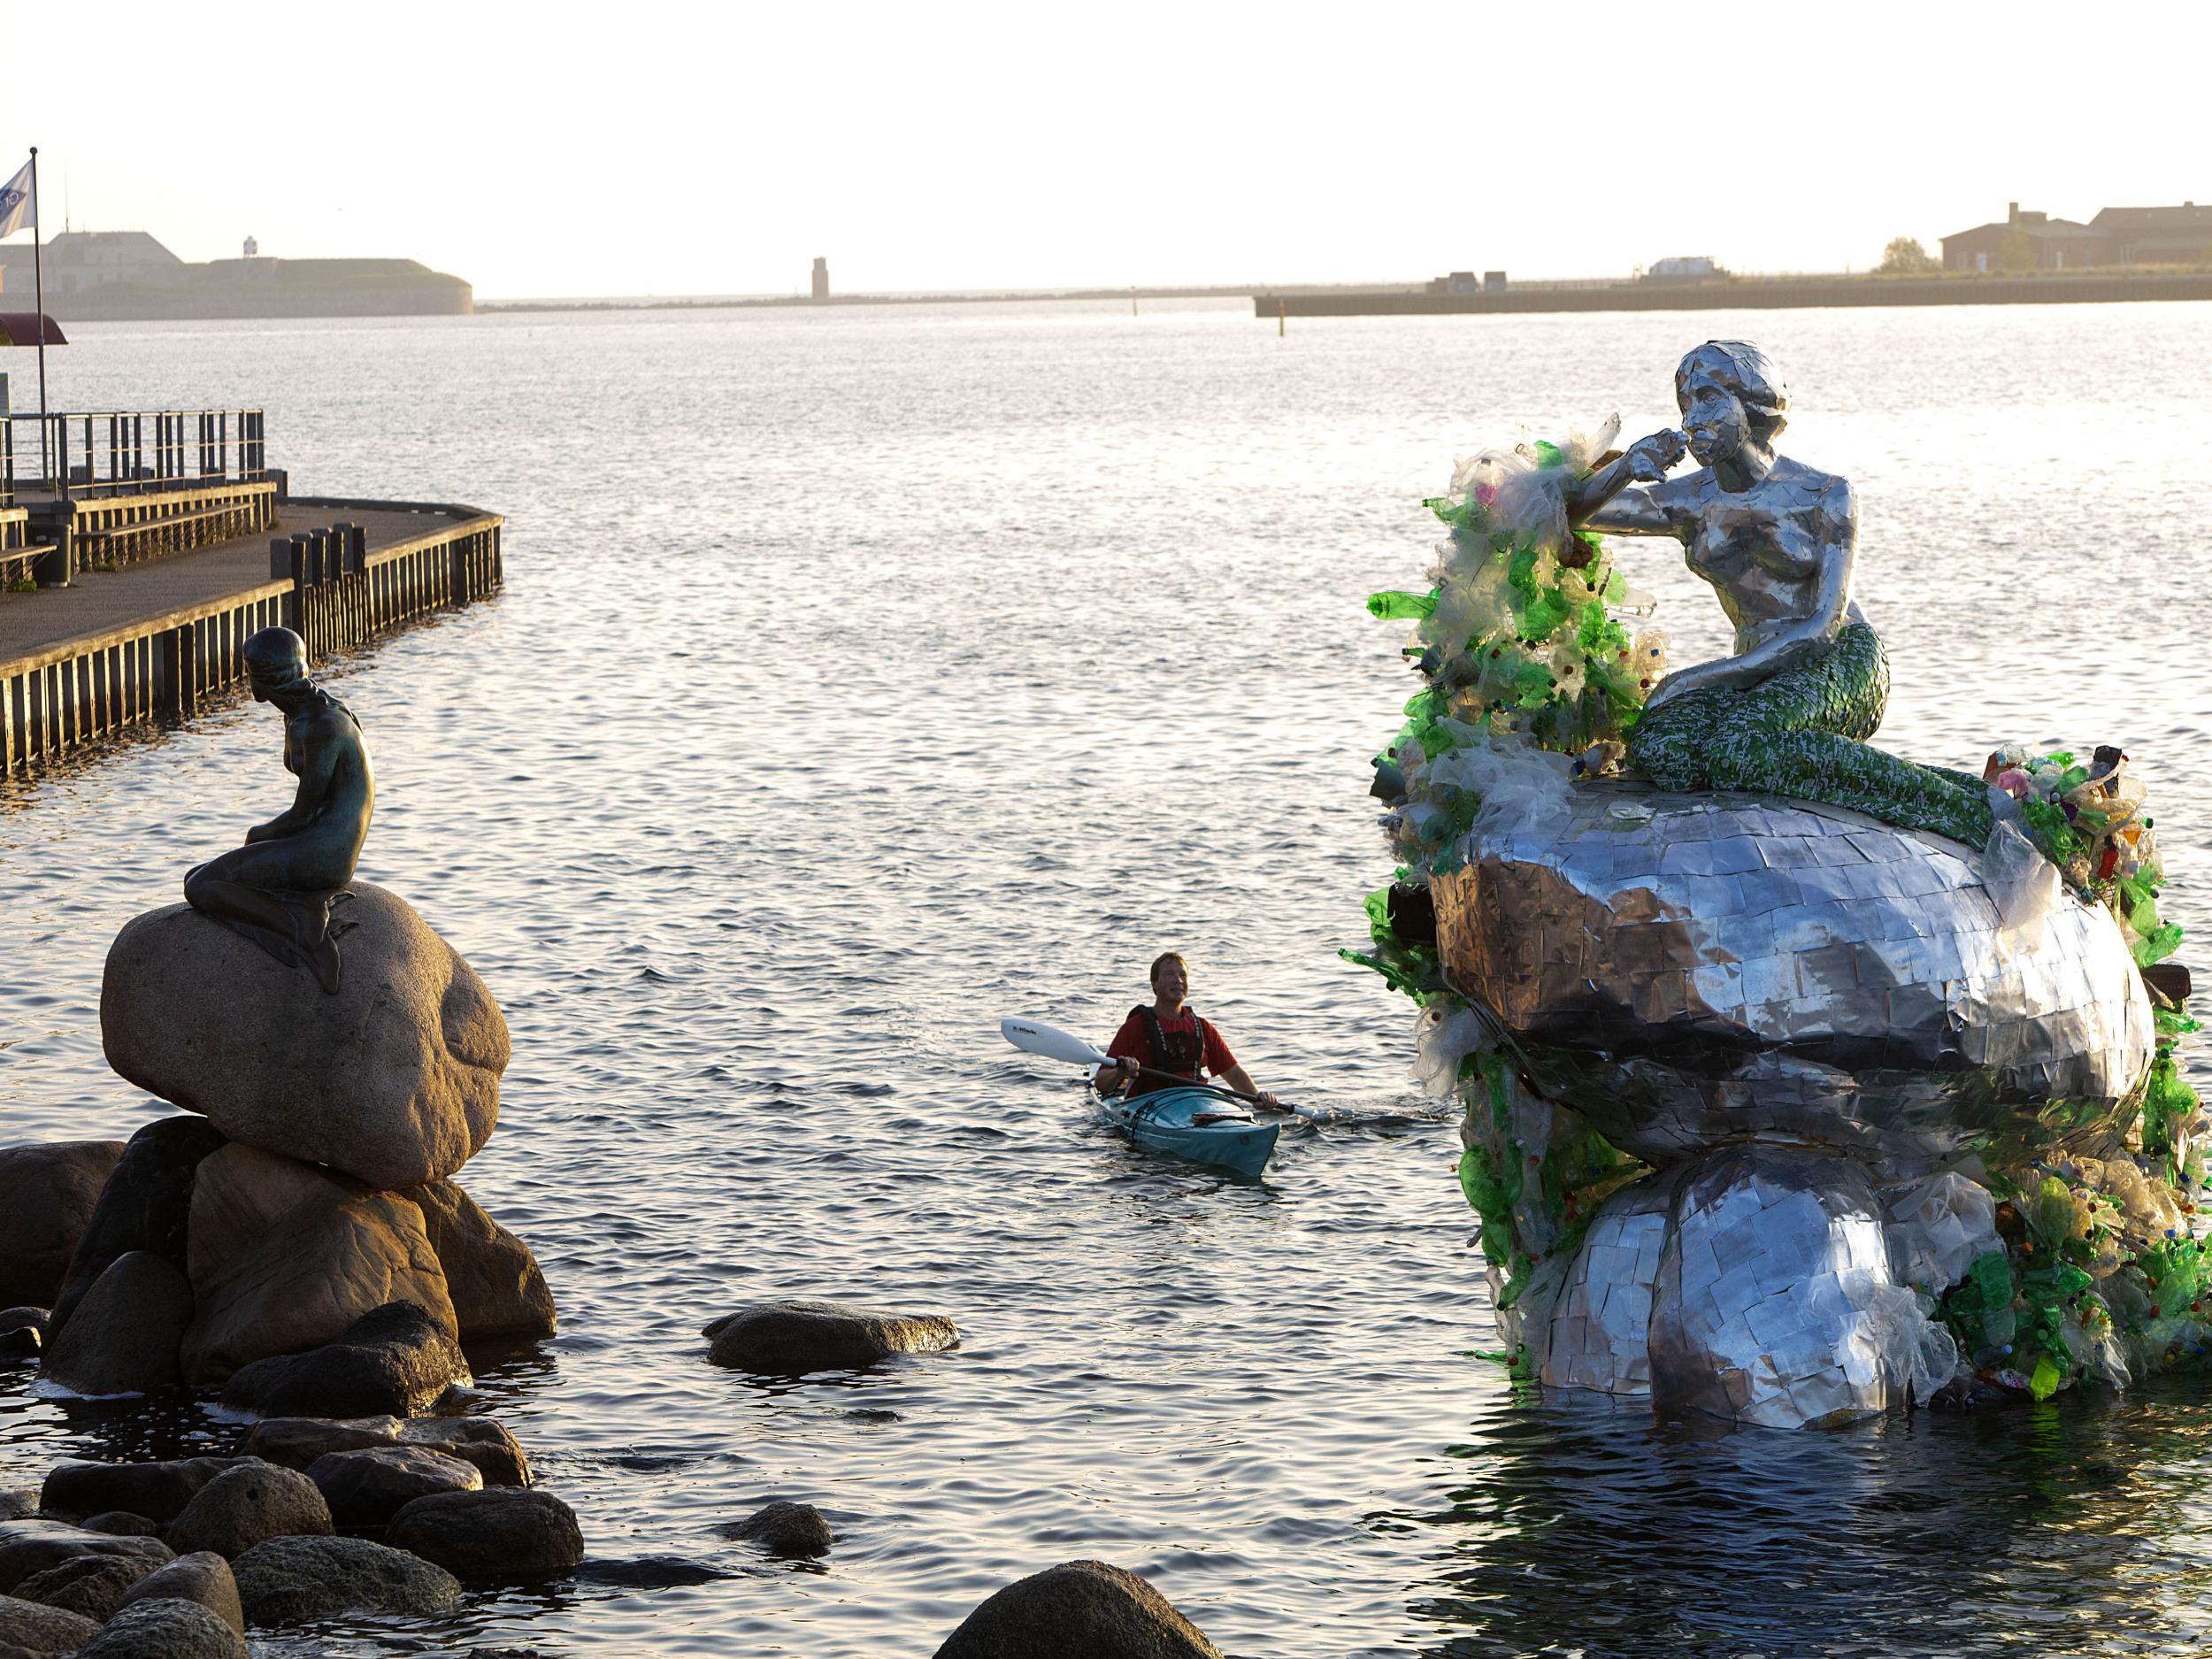 Carlsberg produced its own unique version of Copenhagen’s iconic Little Mermaid statue to accompany the launch of its Snap Pack cans, held together with the glue used to hold them together. The new installation features a rising tide of 137kg of plastic – representative of the amount of plastic that will be eliminated every hour using the new technology